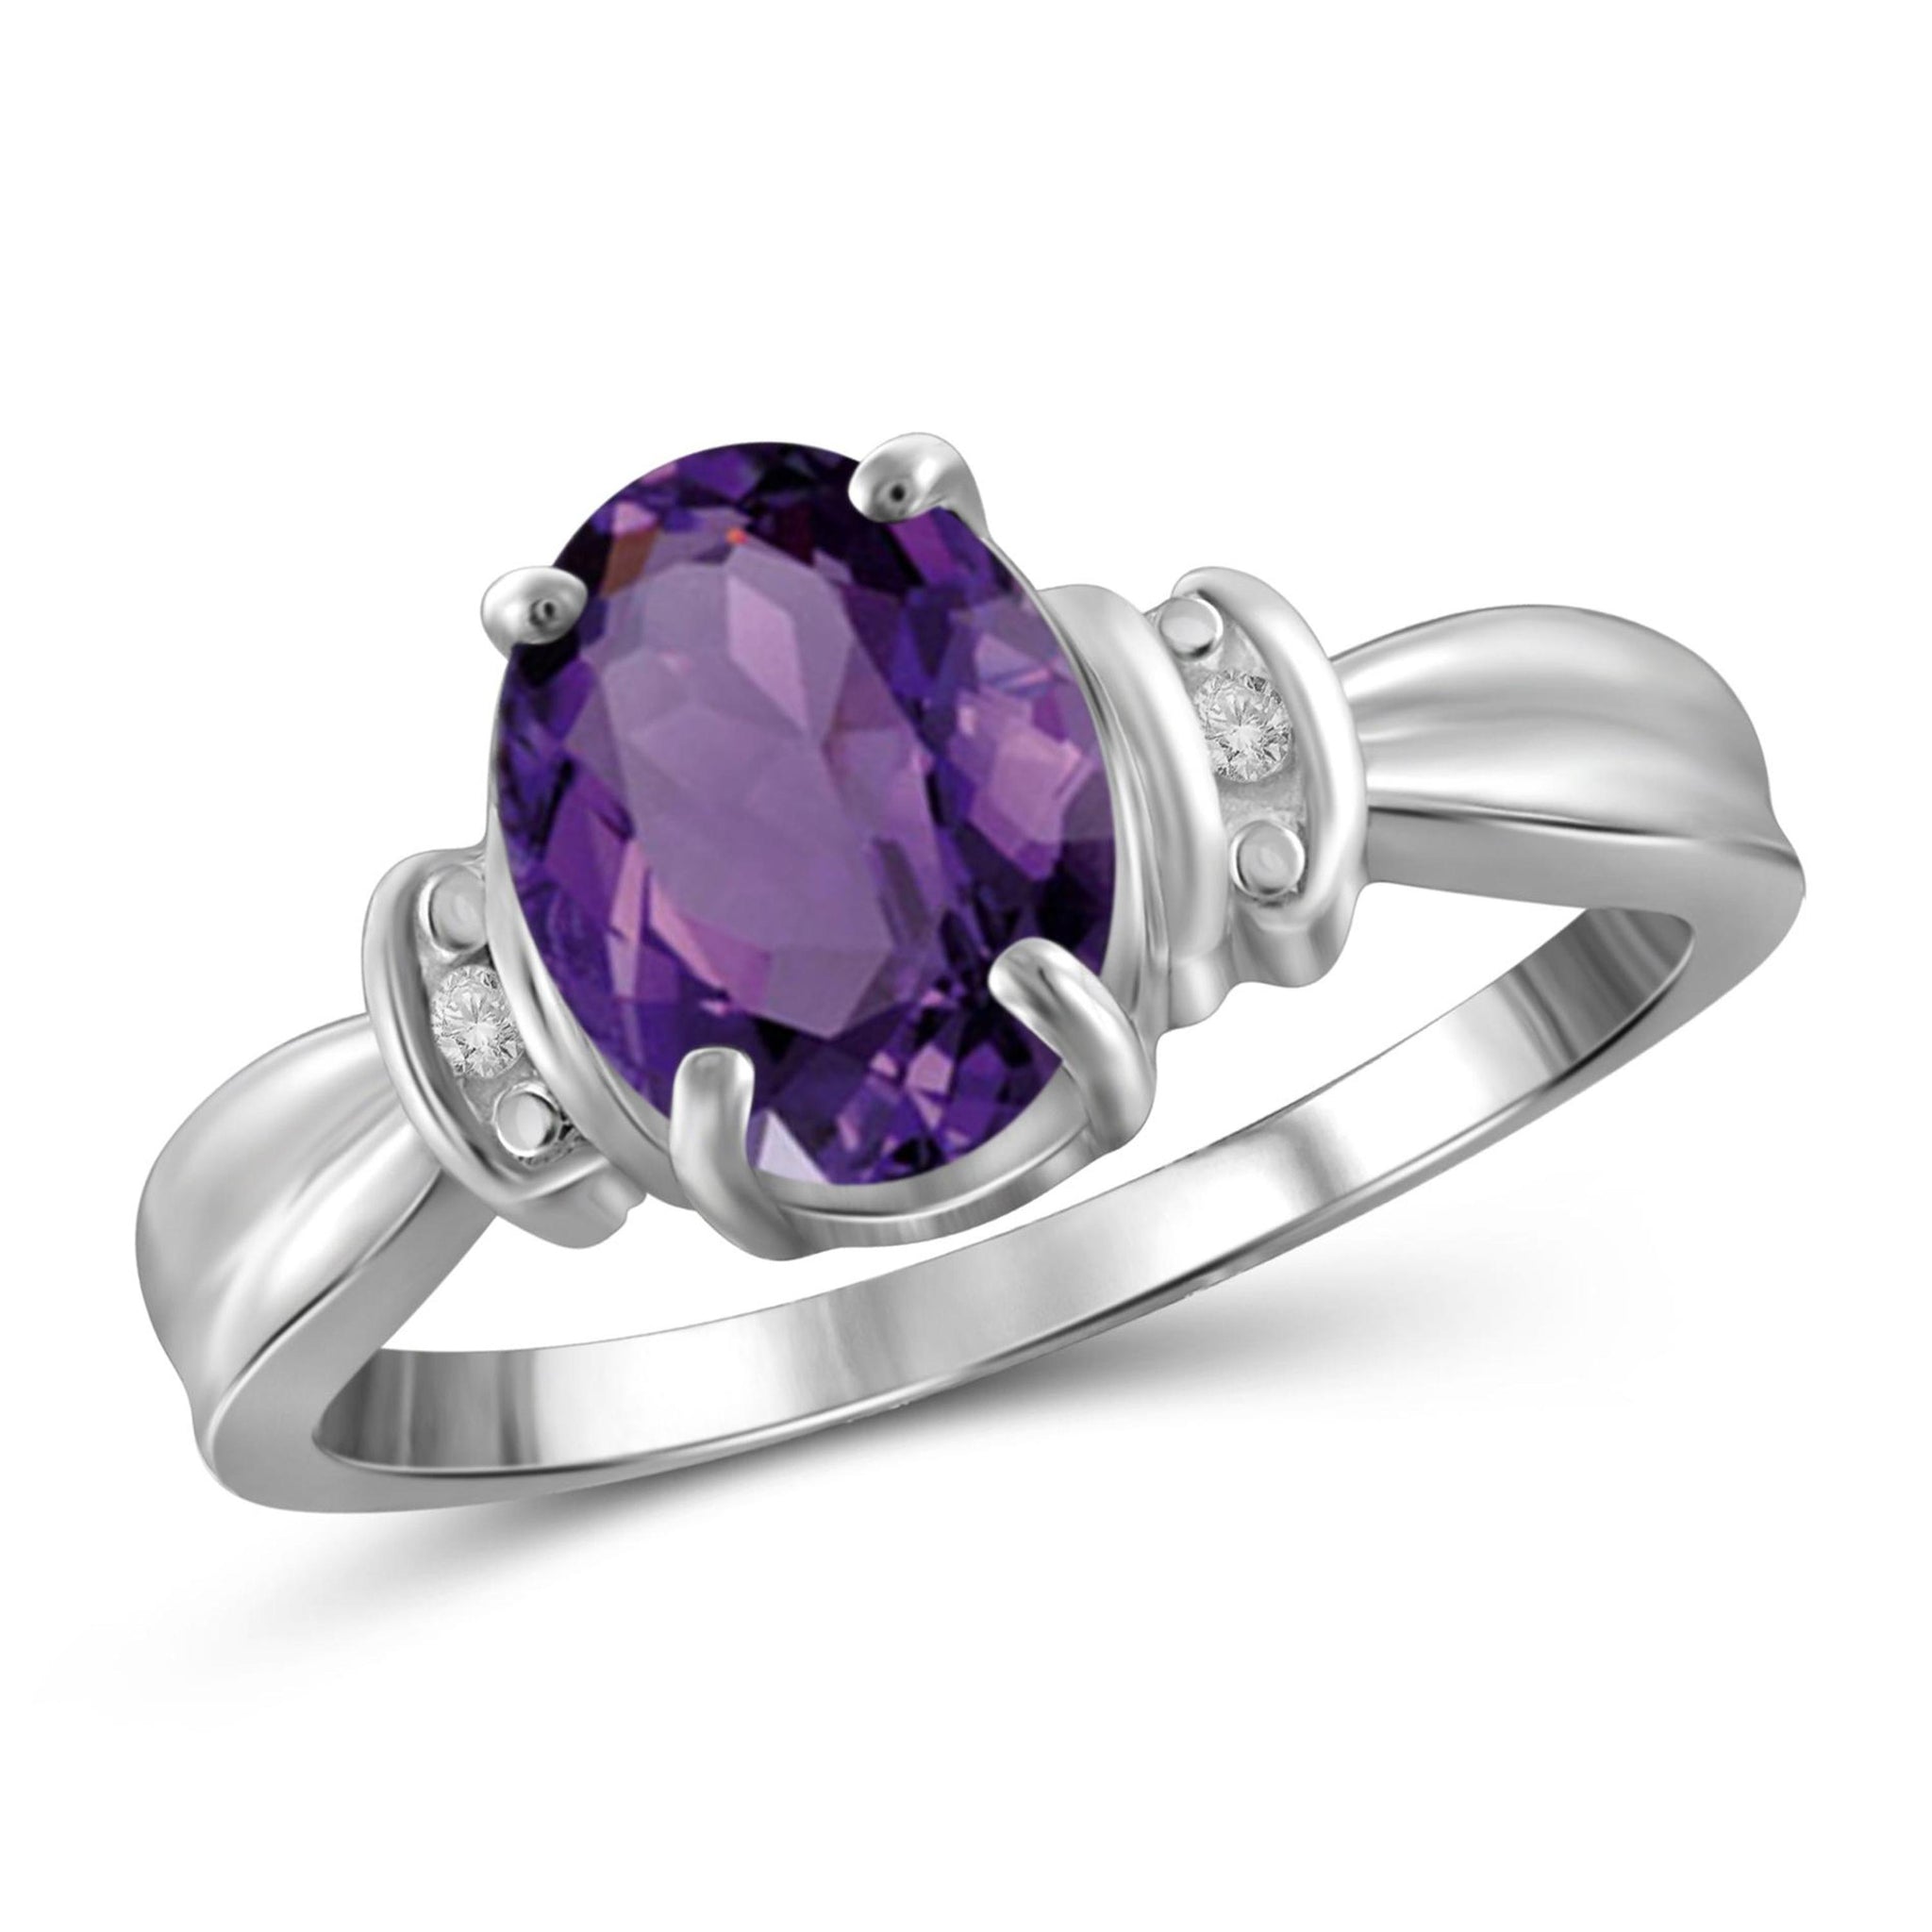 JewelonFire 1.60 Carat T.G.W. Amethyst and White Diamond Accent Sterling Silver Ring - Assorted Colors